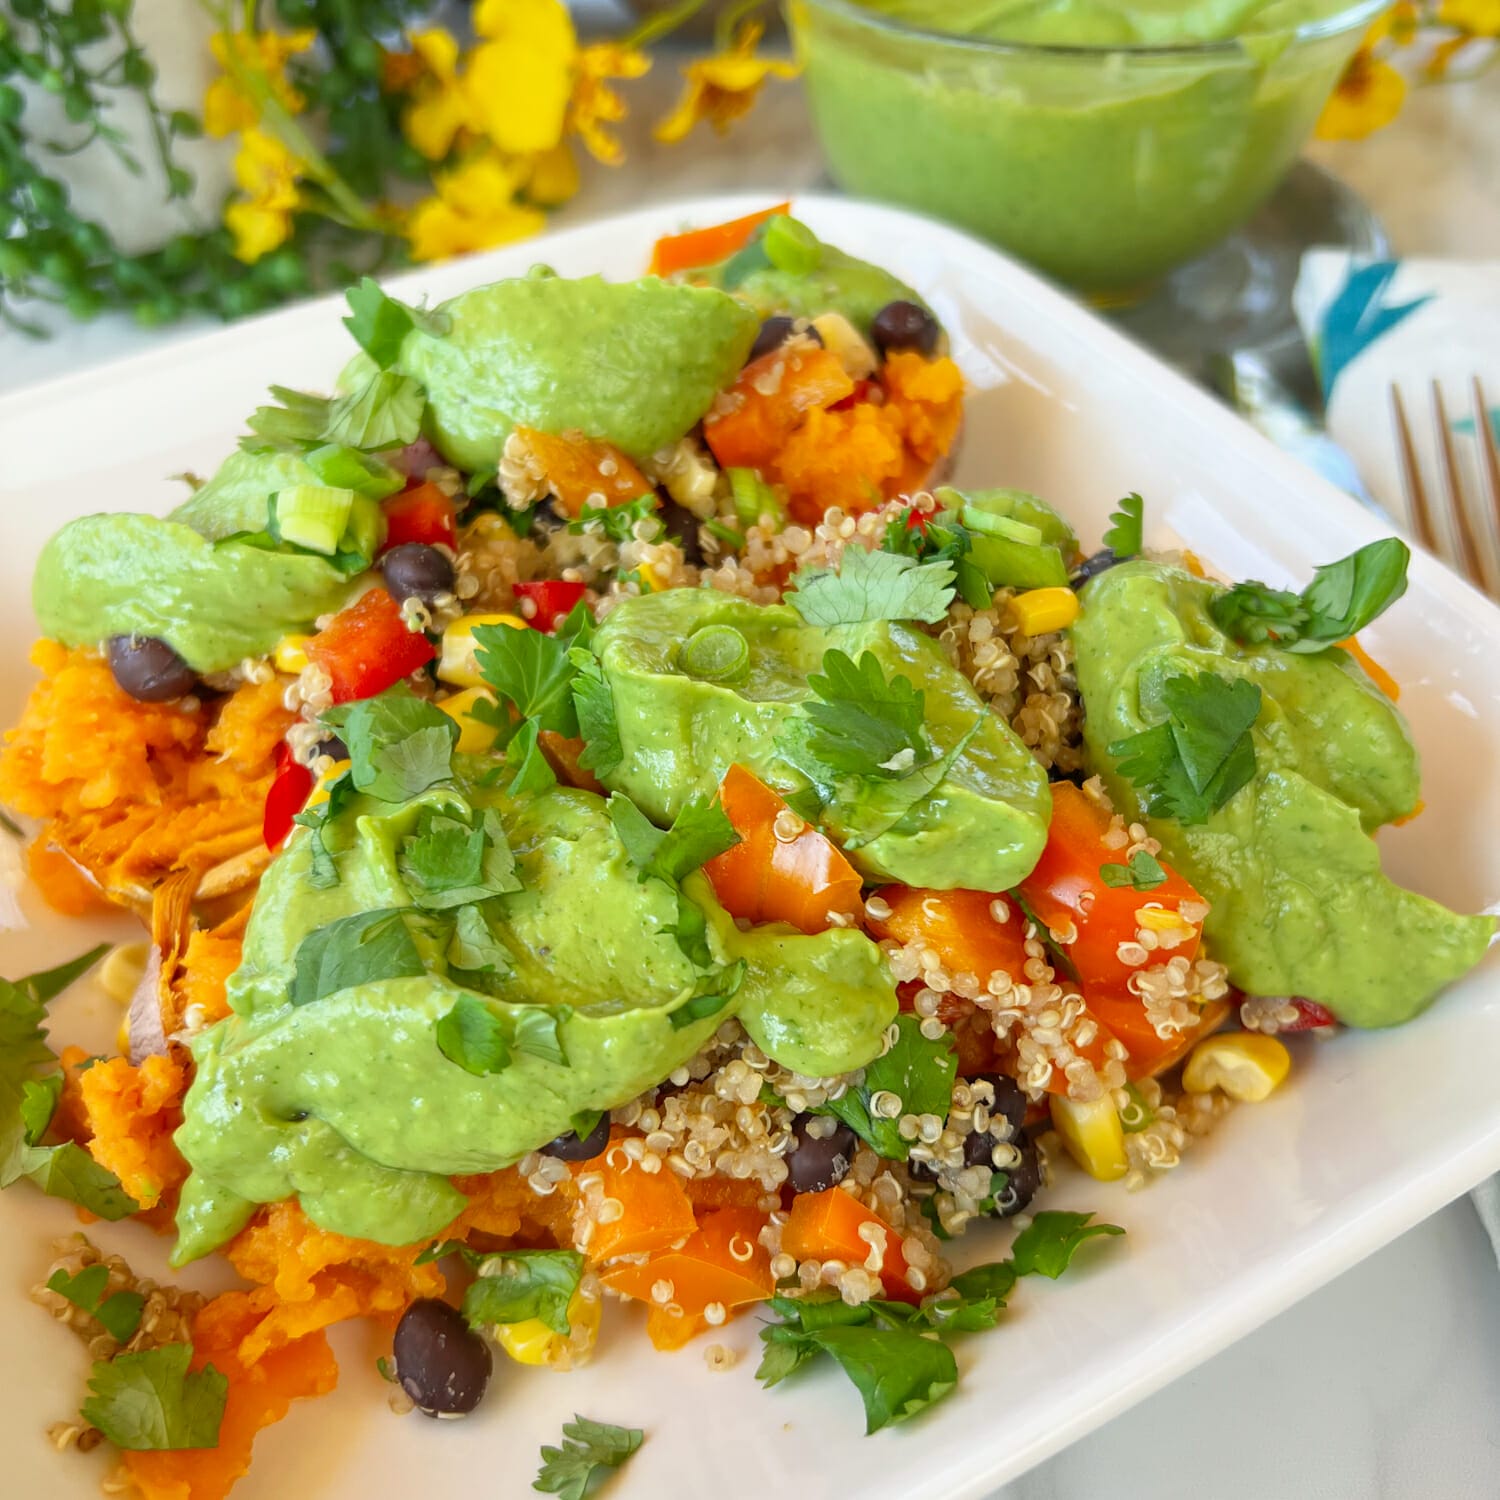 sweet potatoes with quinoa, black beans and sweet peppers topped with fresh avocado sauce